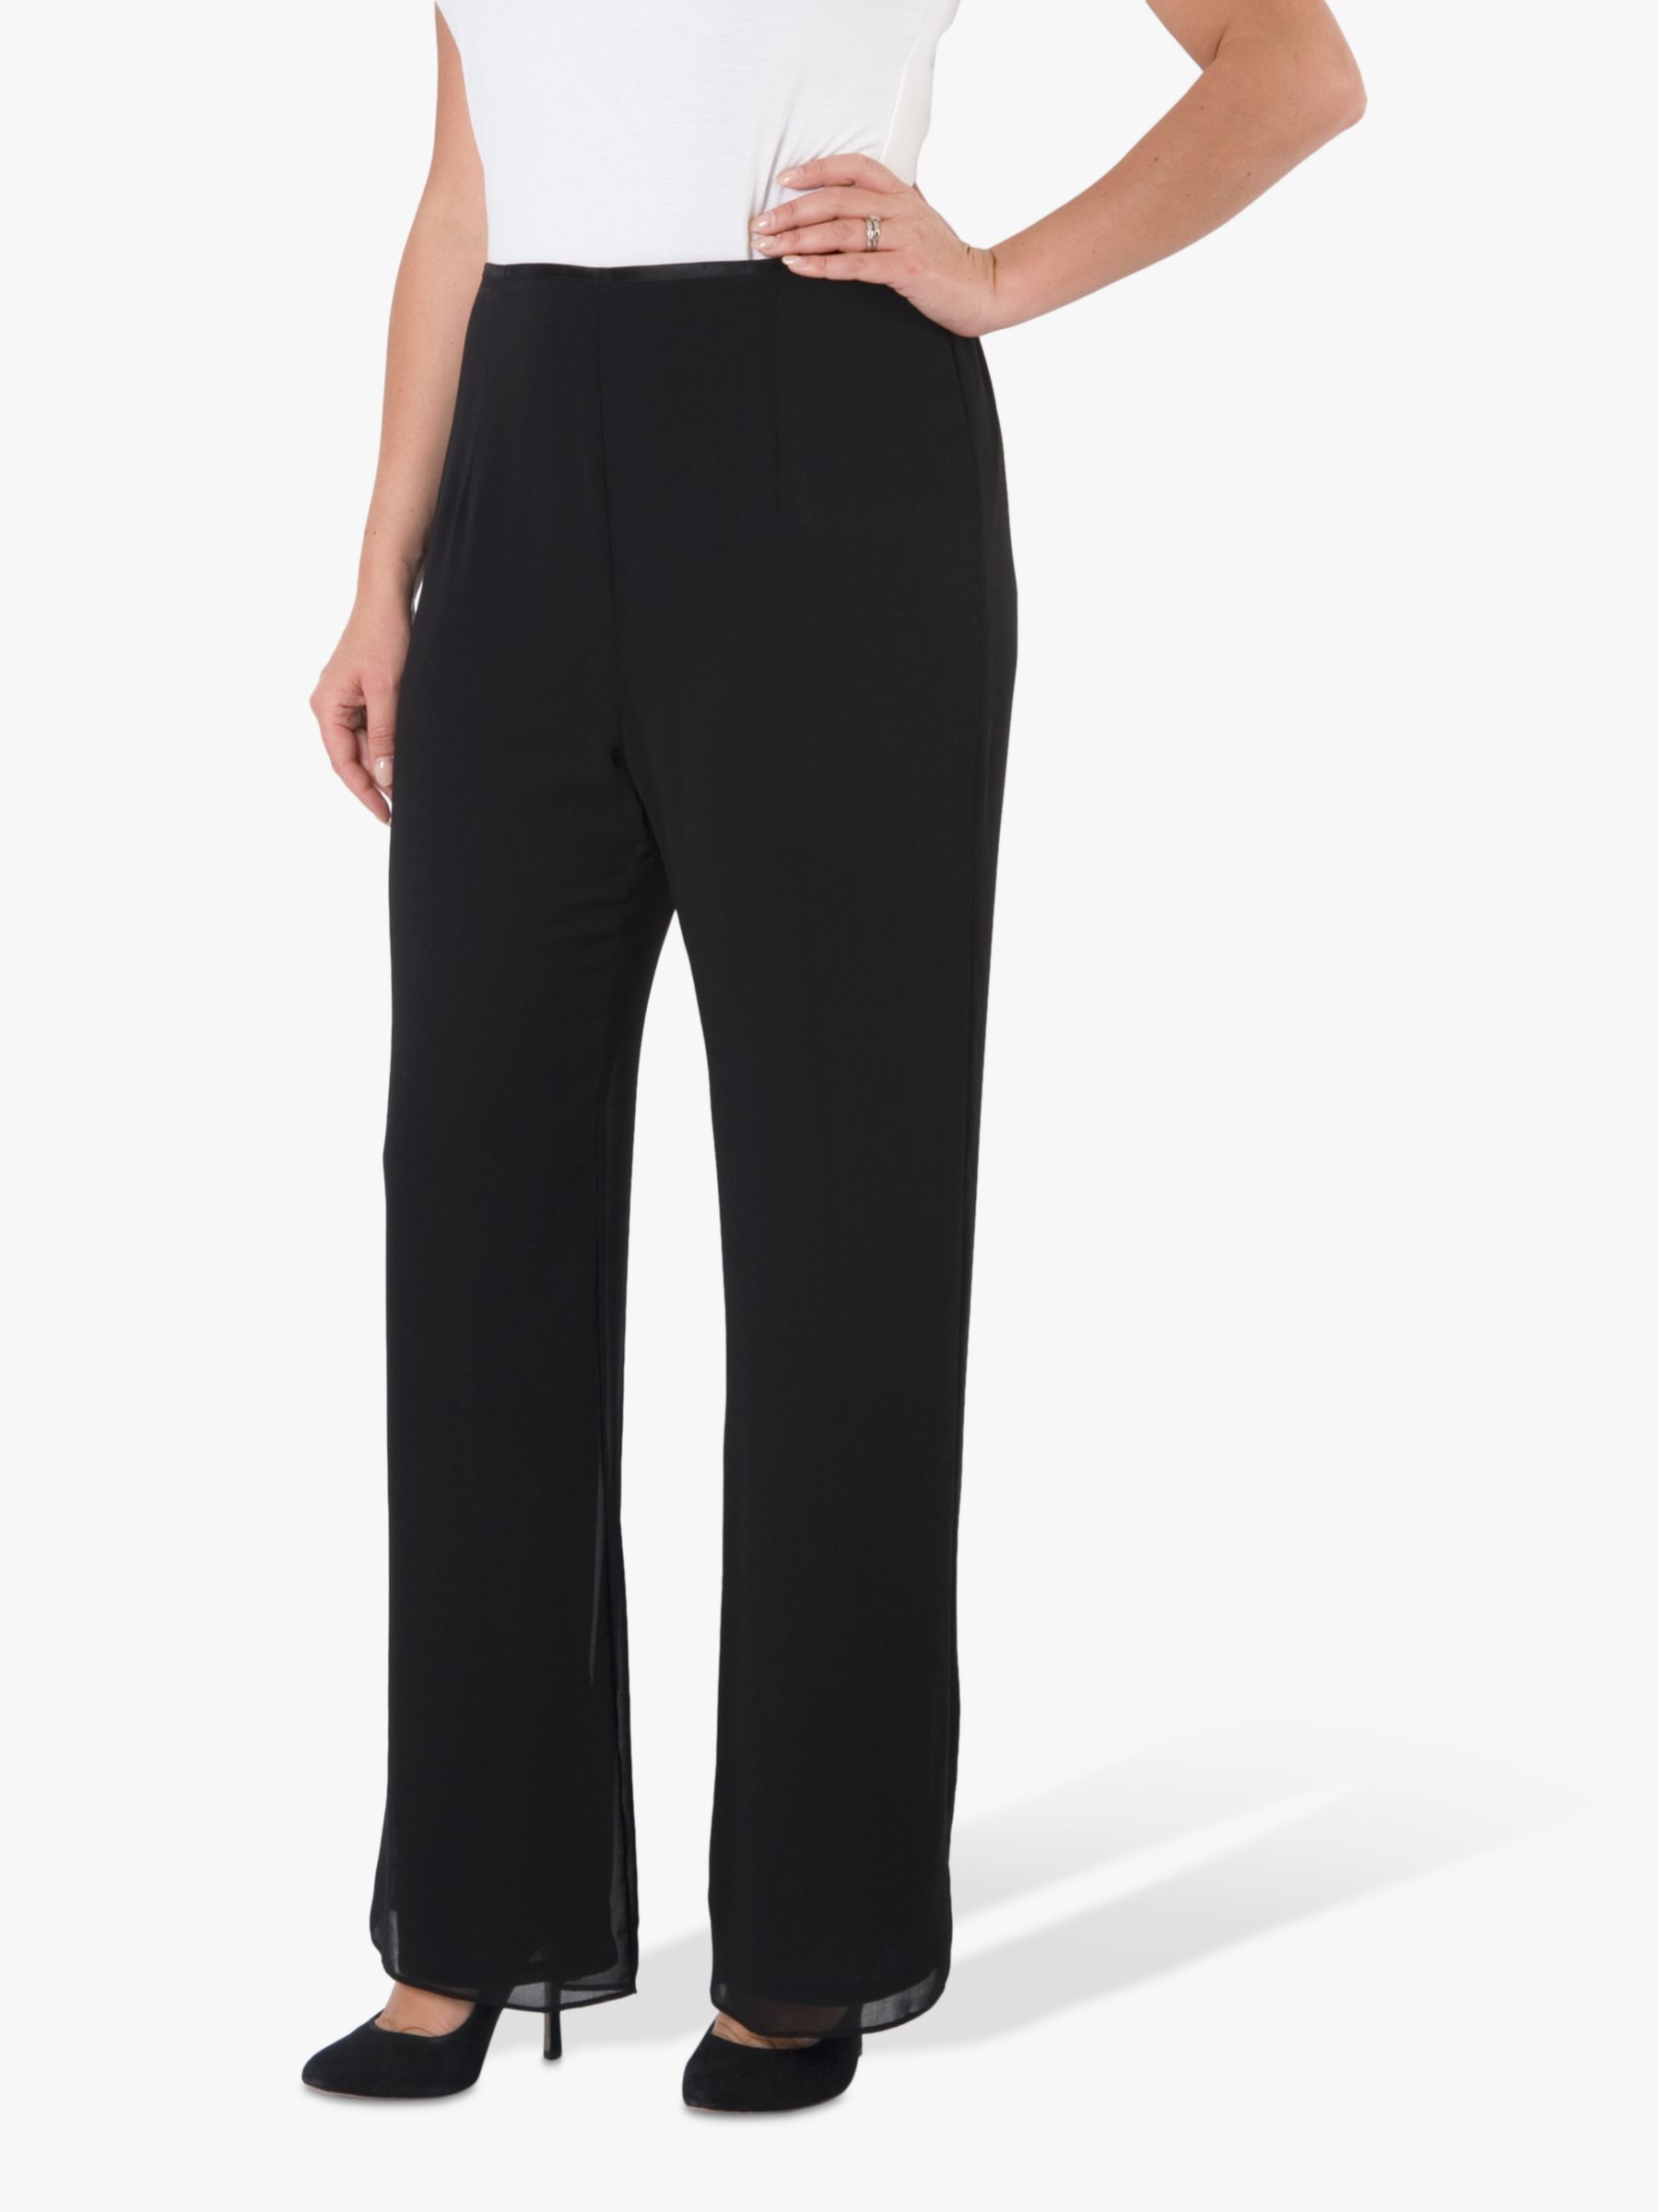 chesca Chiffon Trousers, Black at John Lewis & Partners